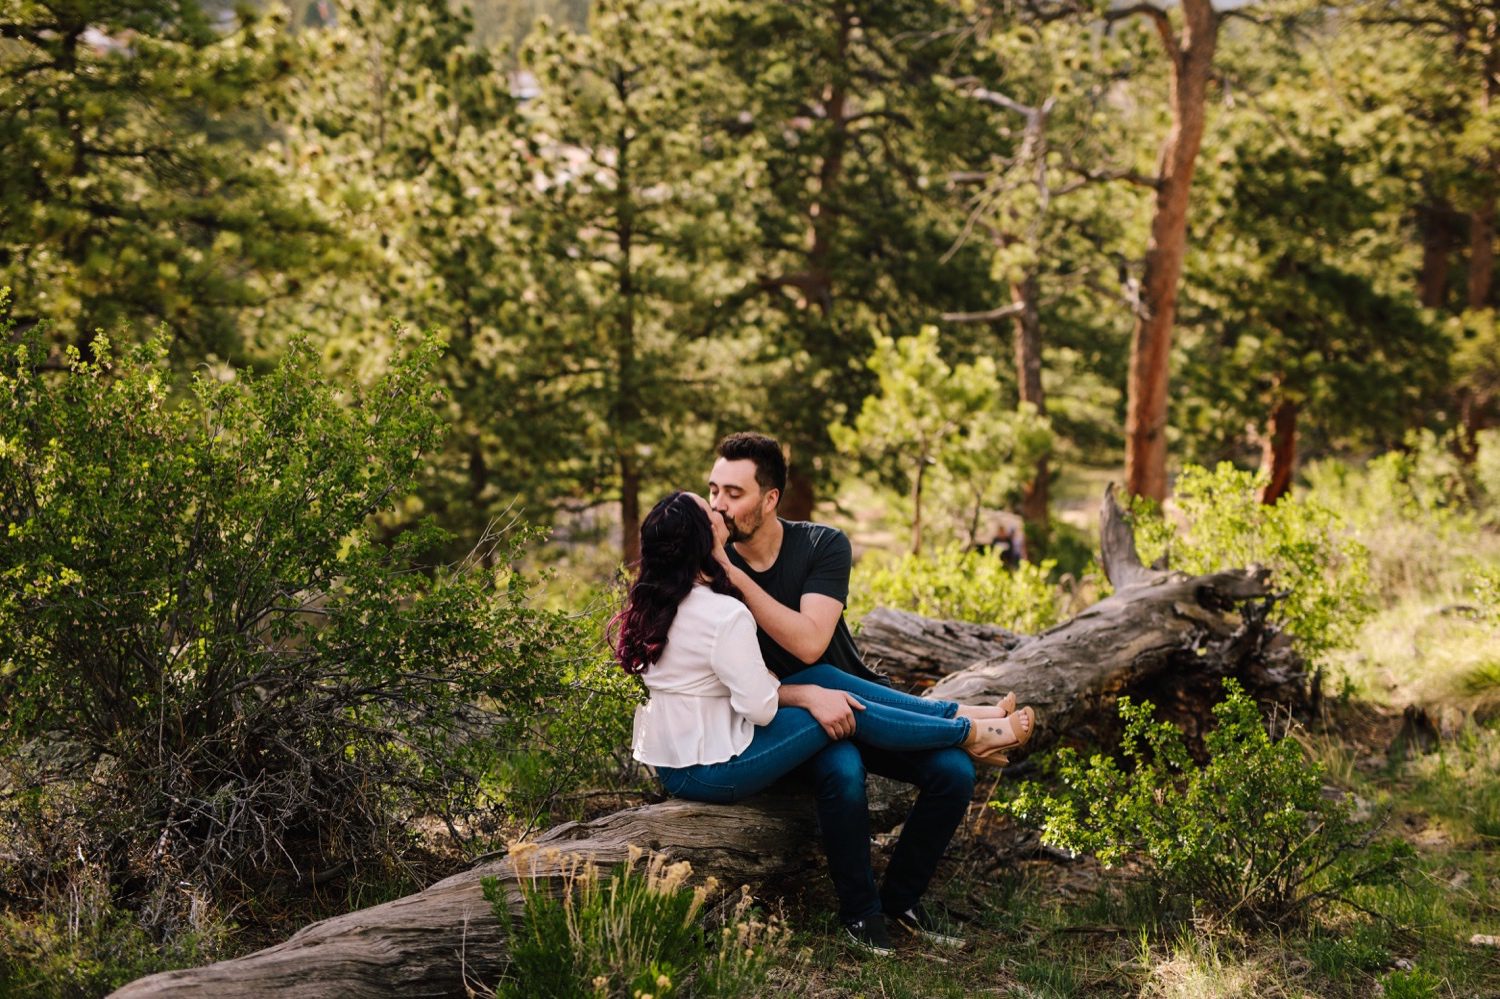 Estes Park Engagement photos, Photography locations outside of Rocky Mountain National Park, Colorado Engagement Photographer, Engagement Session Estes Park, Estes Park Colorado Photographer, Estes Park Engagement Photographer, Estes Park Engagement Session, Colorado Mountain Engagement Photos, Mountain Engagement Session, What to wear for engagement photos, Outfit ideas for engagement photos, Engagement Pictures, Engagement Session Posing, Engagement Photos in Colorado, Spring Engagement Photos